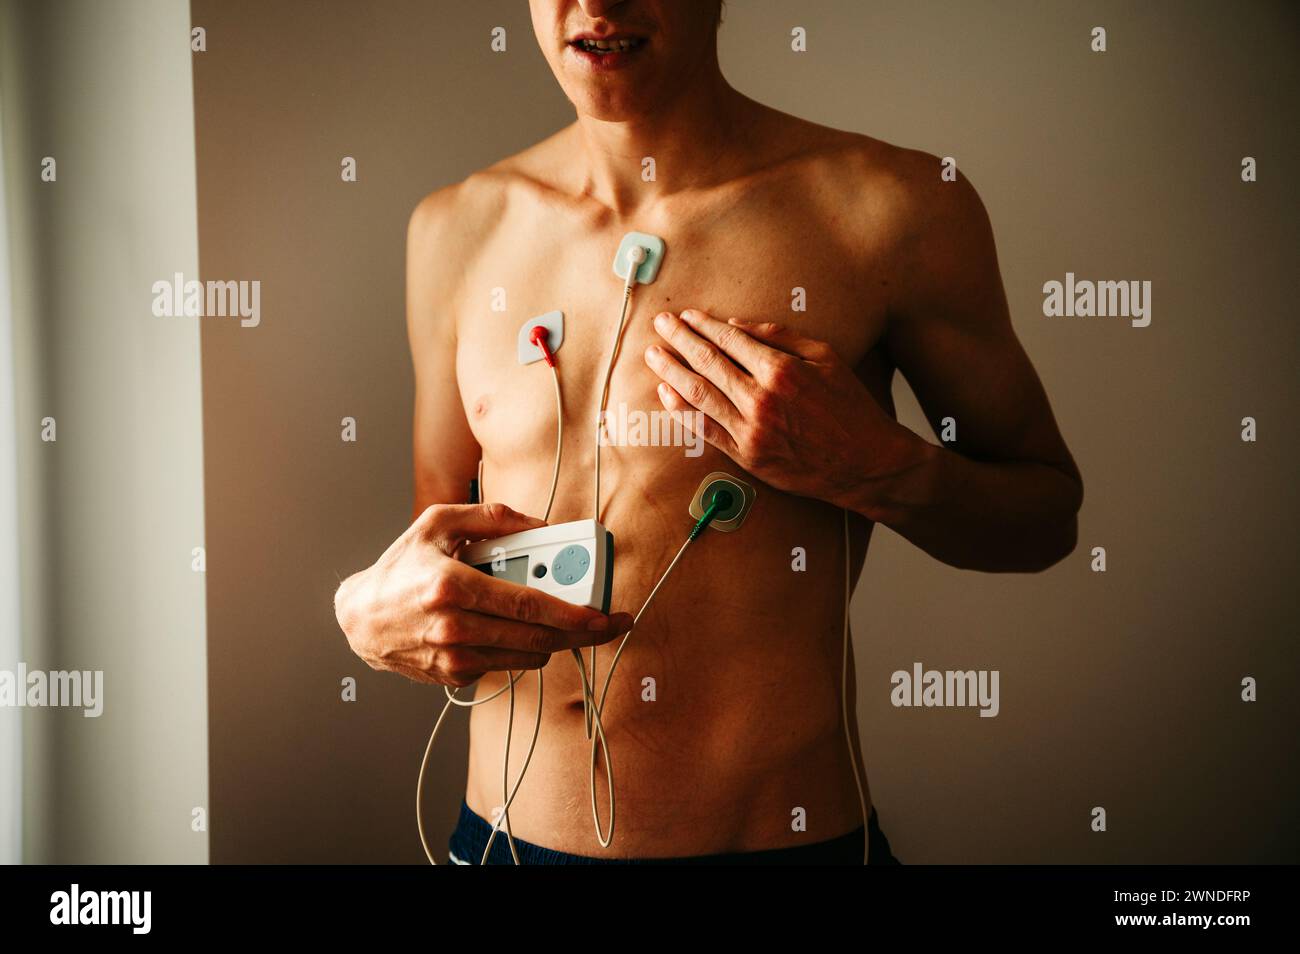 Heart Rate Monitor. Young Man's ECG Recording in Natural Illumination. Cardiovascular Health for a Complete and Enlightening Assessment Stock Photo